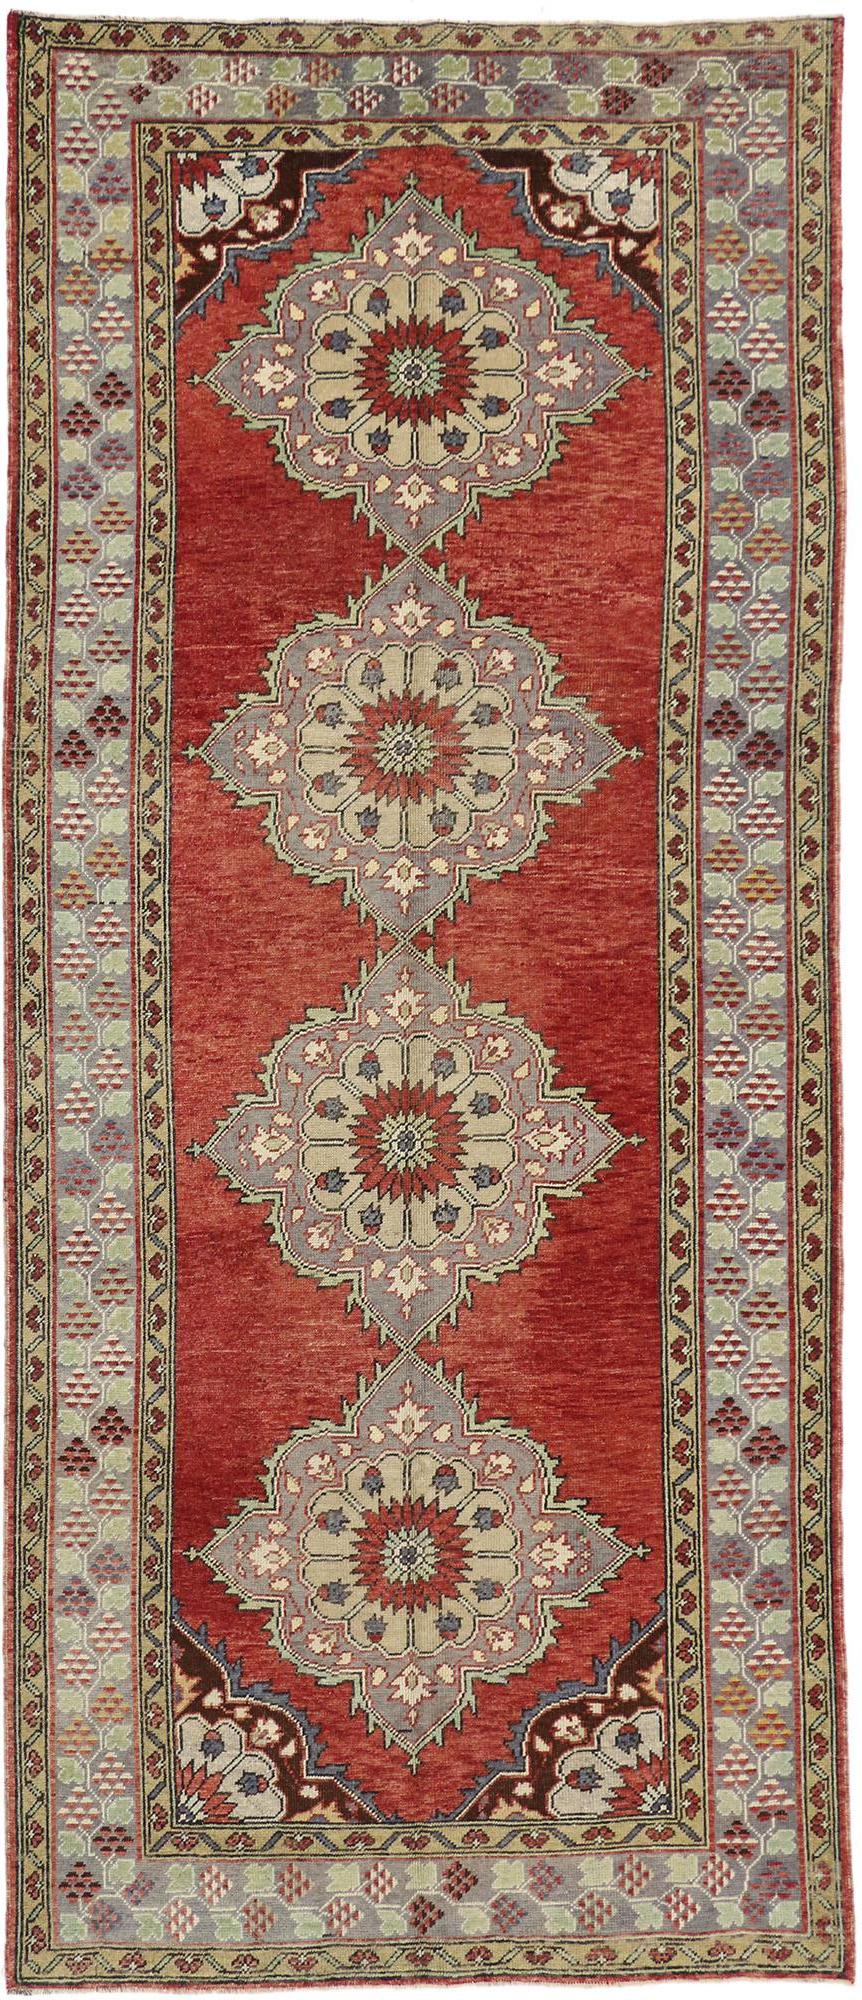 51361 Vintage Turkish Oushak Carpet Runner with Traditional Style 04'10 x 11'03. With its striking appeal and saturated red color palette, this hand-knotted wool vintage Turkish Oushak runner appears like a sumptuous Italian velvet, recalling the